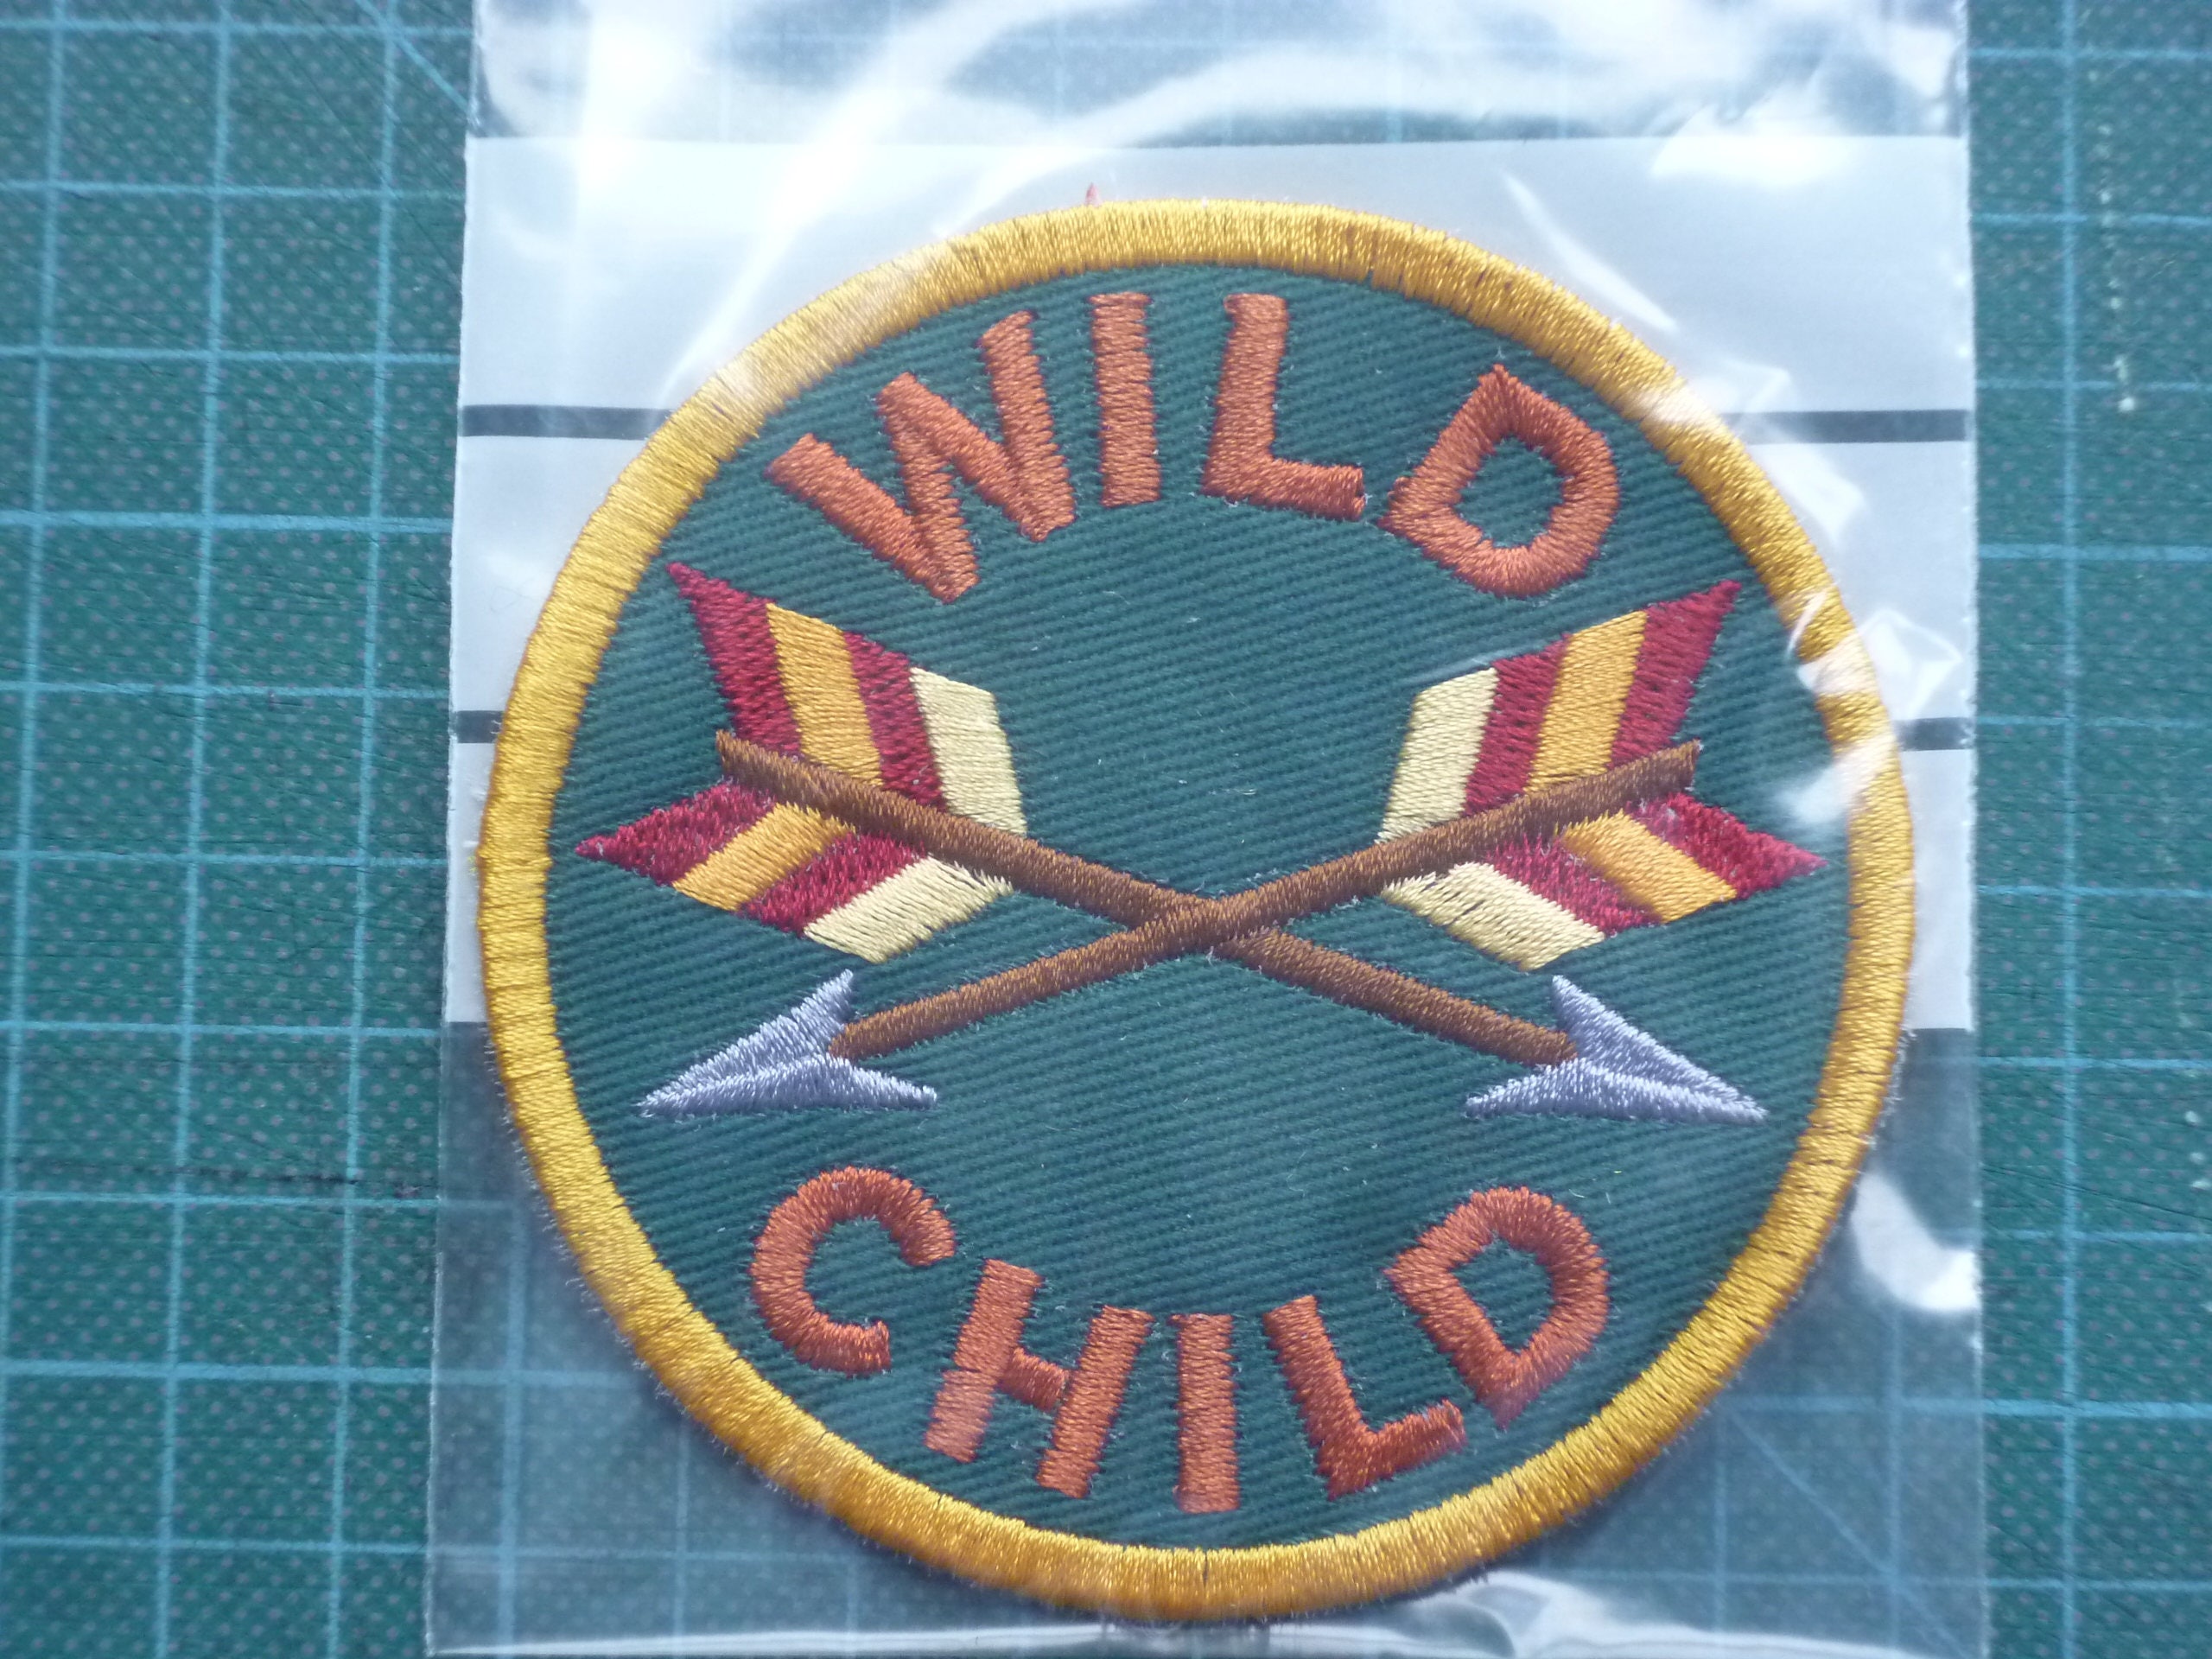 Wild Child Patches Sew on Patches for Jackets Hats and Bags 